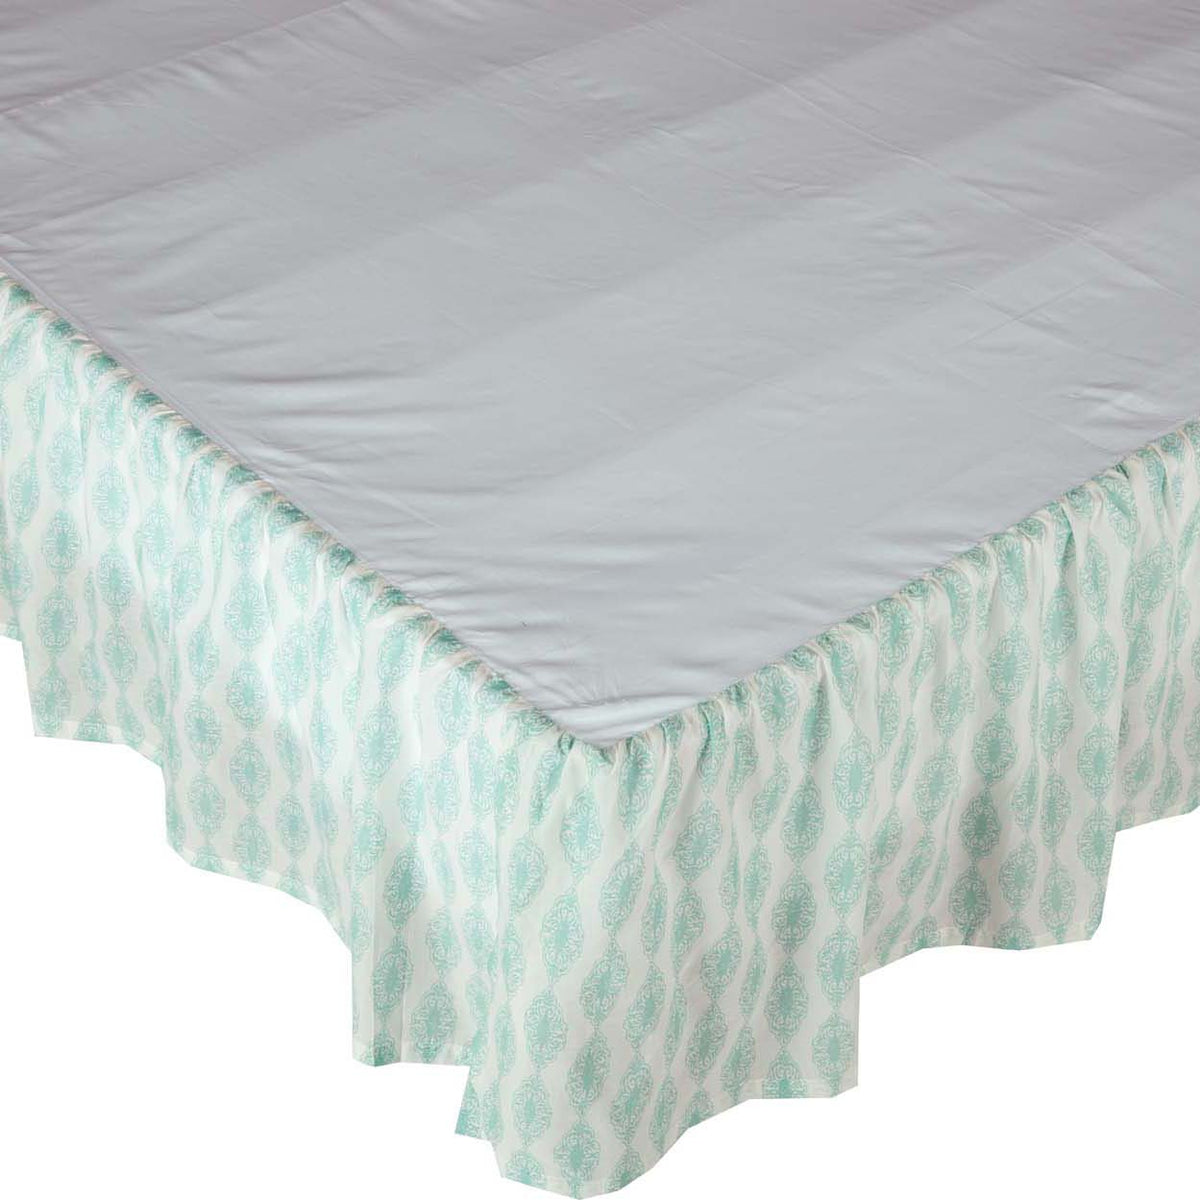 April & Olive Avani Sea Glass Queen Bed Skirt 60x80x16 By VHC Brands